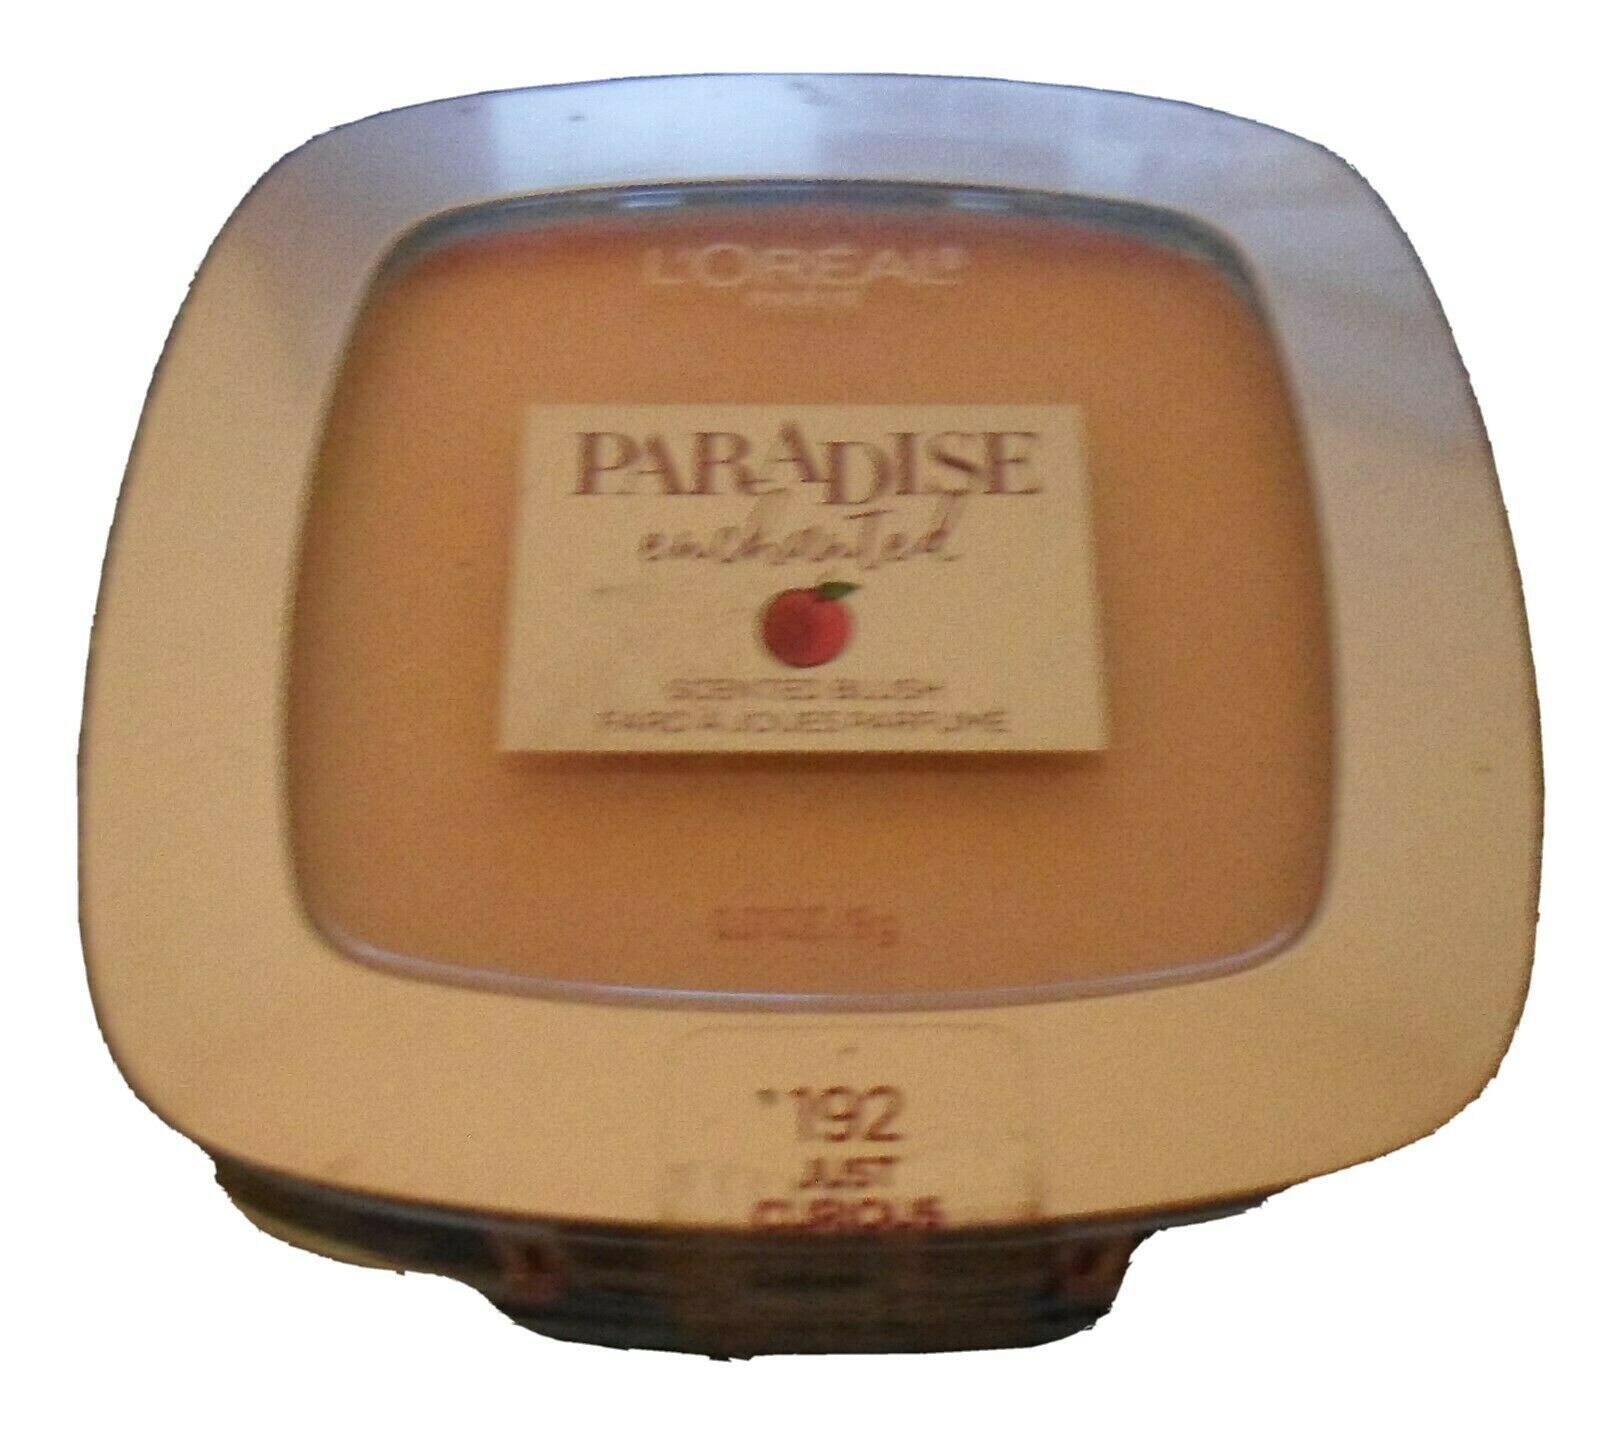 L'oreal Paradise Enchanted Fruit Scented Blush just curious 192 ~ New Sealed - $1.58